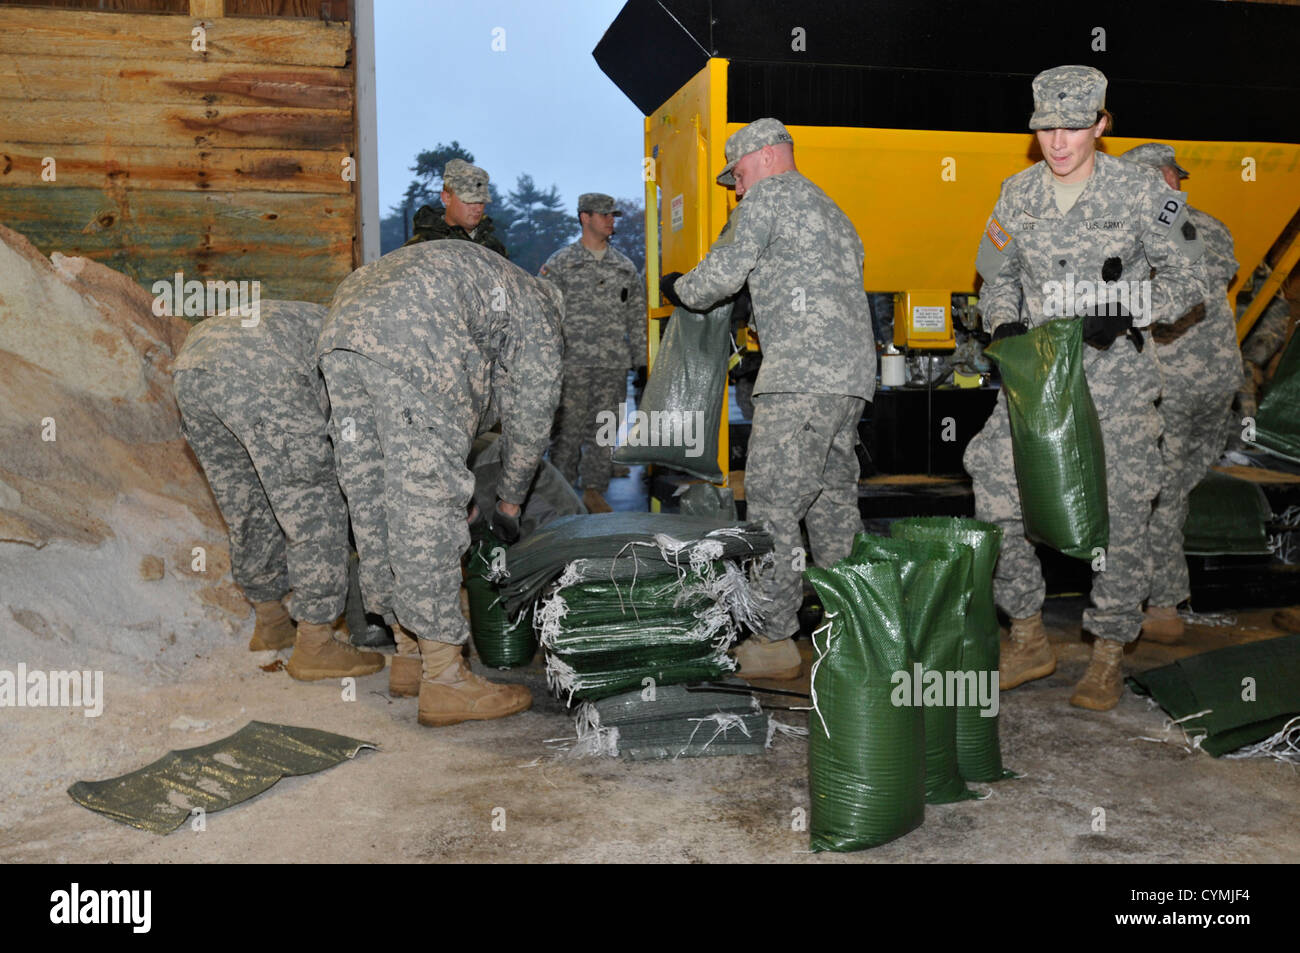 Massachusetts National Guardsmen fill sand bags Oct. 28, 2012, in preparation for Hurricane Sandy at the Massachusetts Department of Transportation facility. (Photo by Staff Sgt. James Lally) Stock Photo